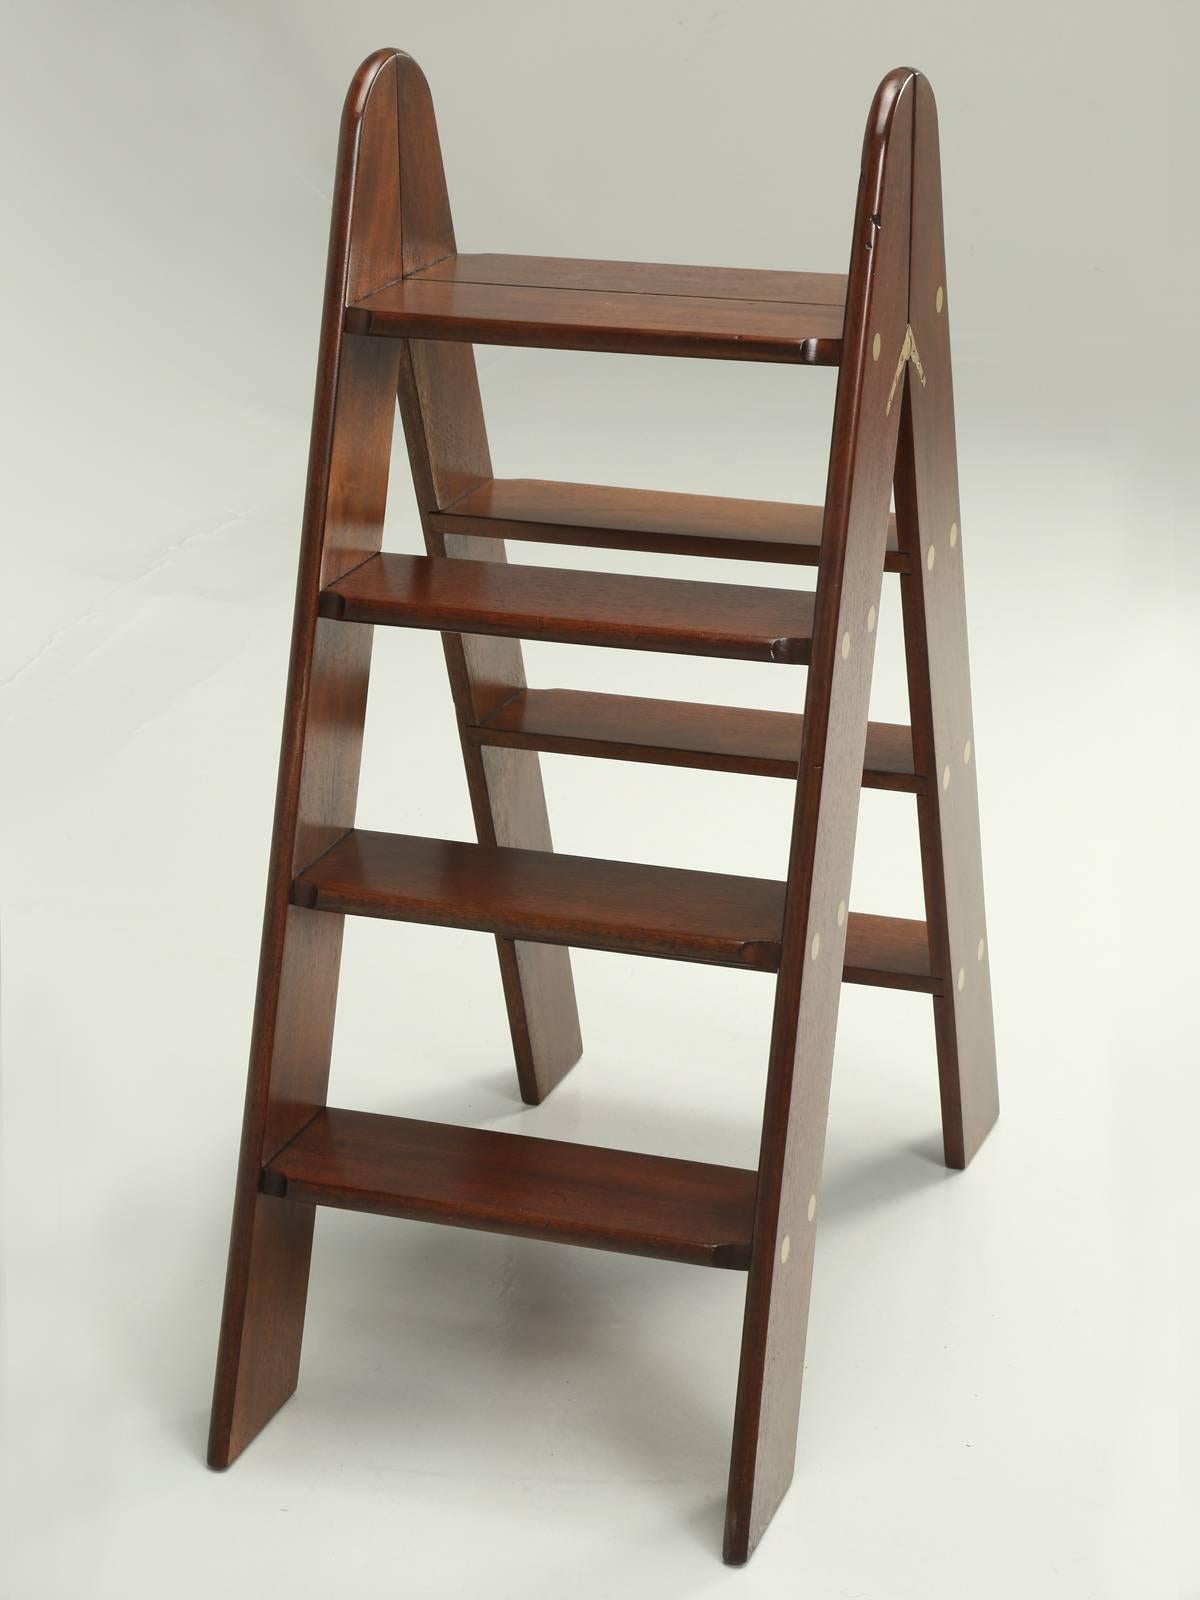 Beautifully constructed from solid mahogany and brass and would look great with some old leather- bound books sitting on the ladder. Kind of difficult to date, but our old plank finishing department, did have to refinish the mahogany ladder and